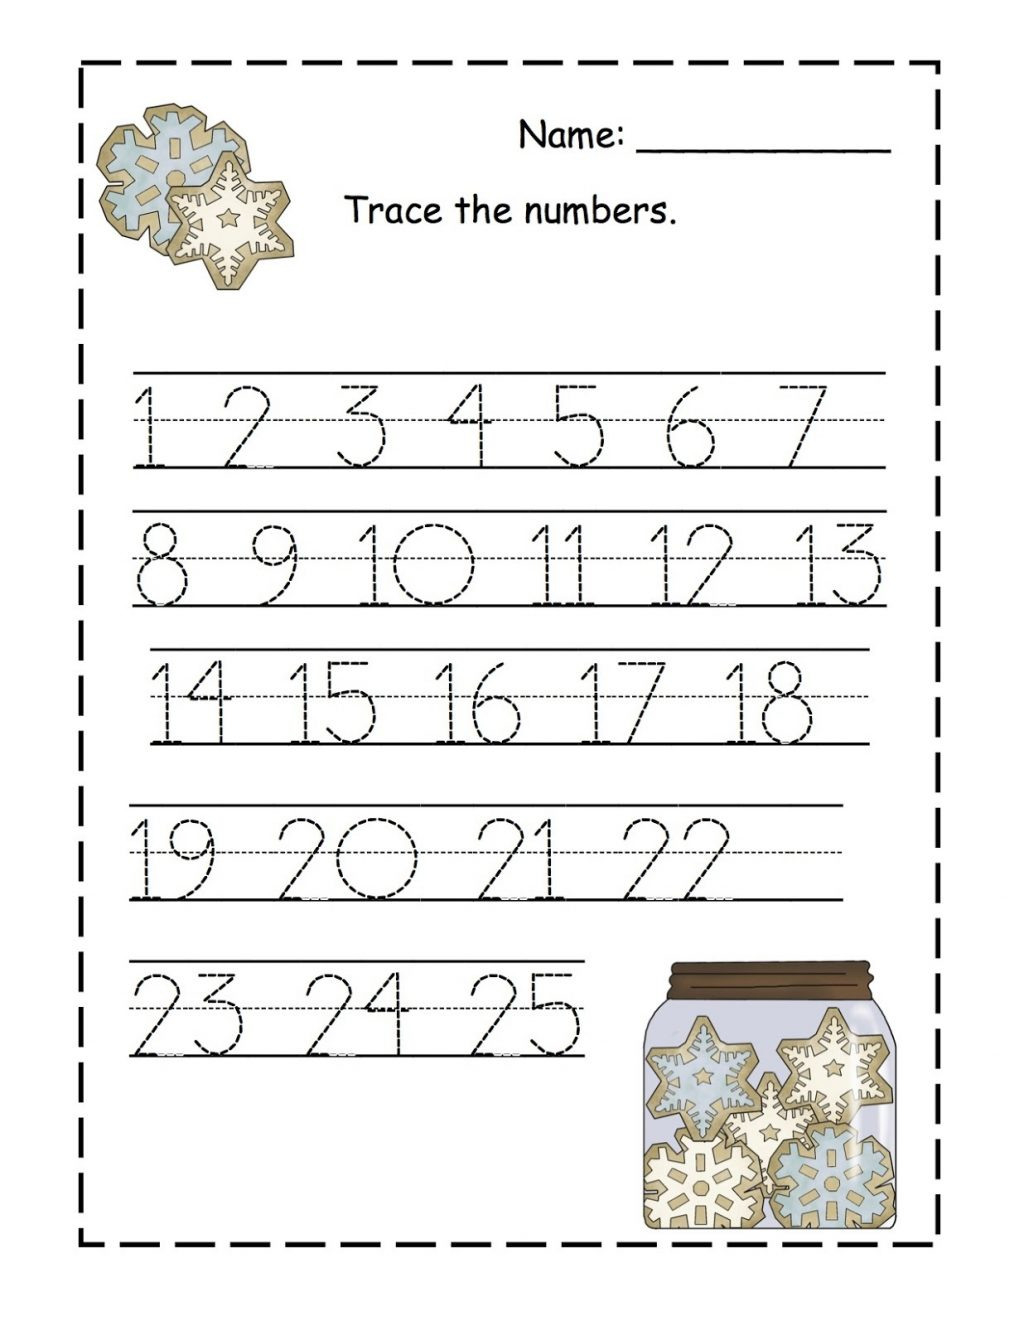 Worksheet Ideas  Free Number Tracing Worksheets Trace